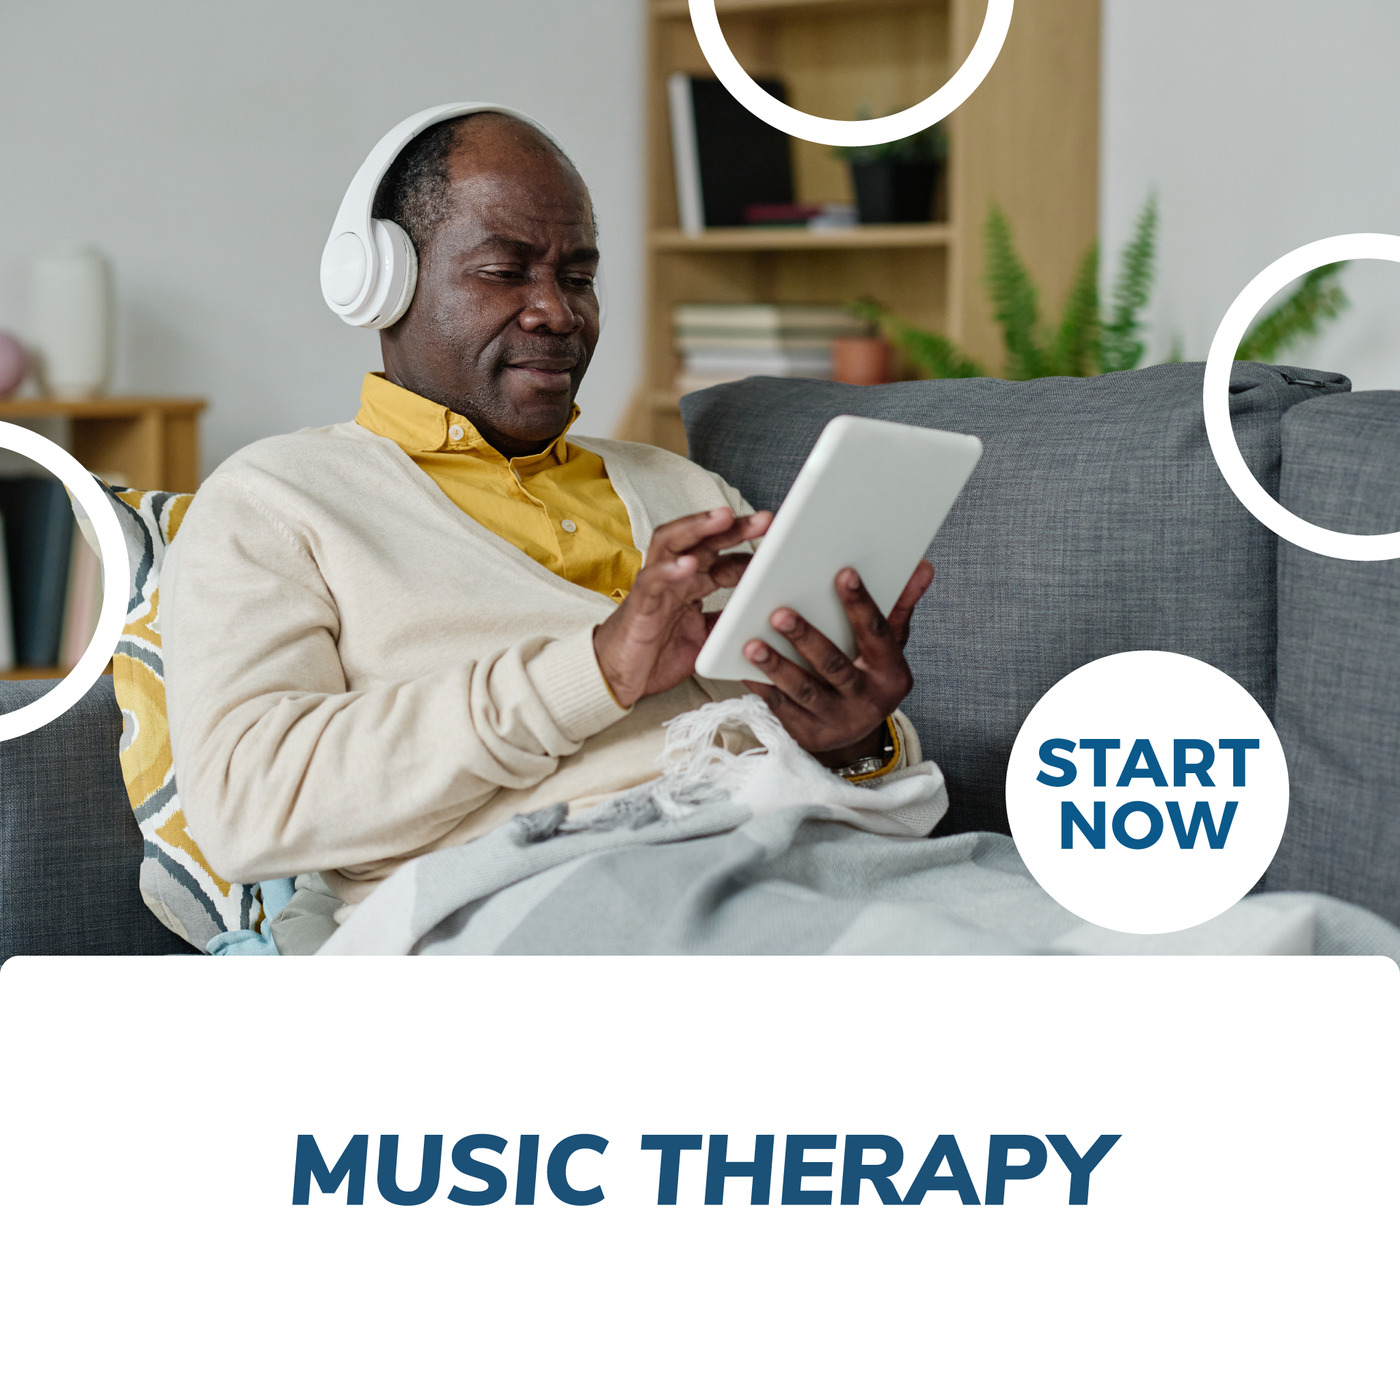 Music Therapy Certification Course Online Courses For Success